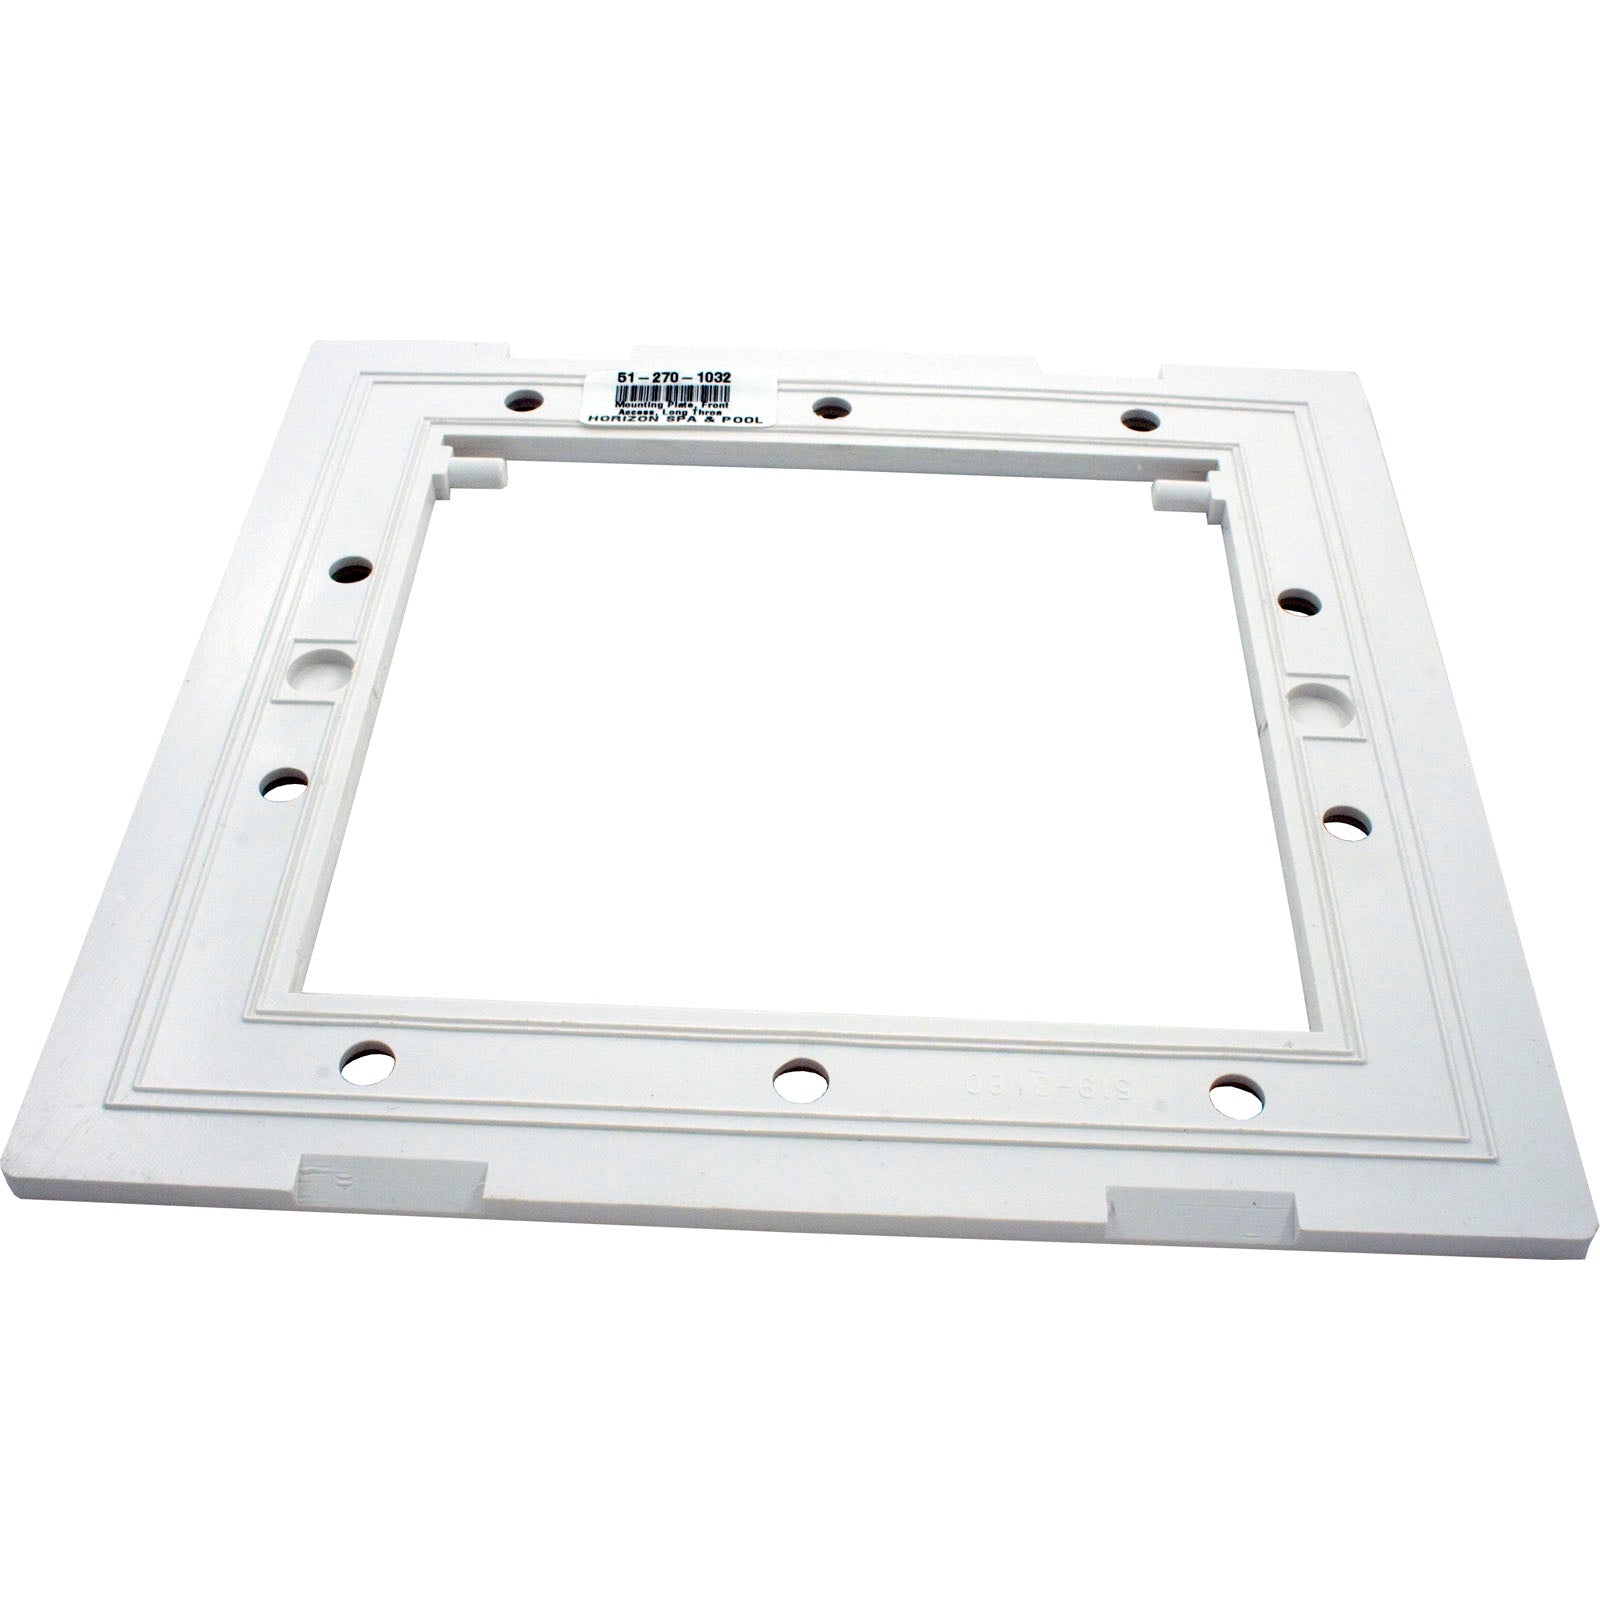 Skimmer Faceplate, Waterway FloPro, Front Access, Long, White/ 519-3180